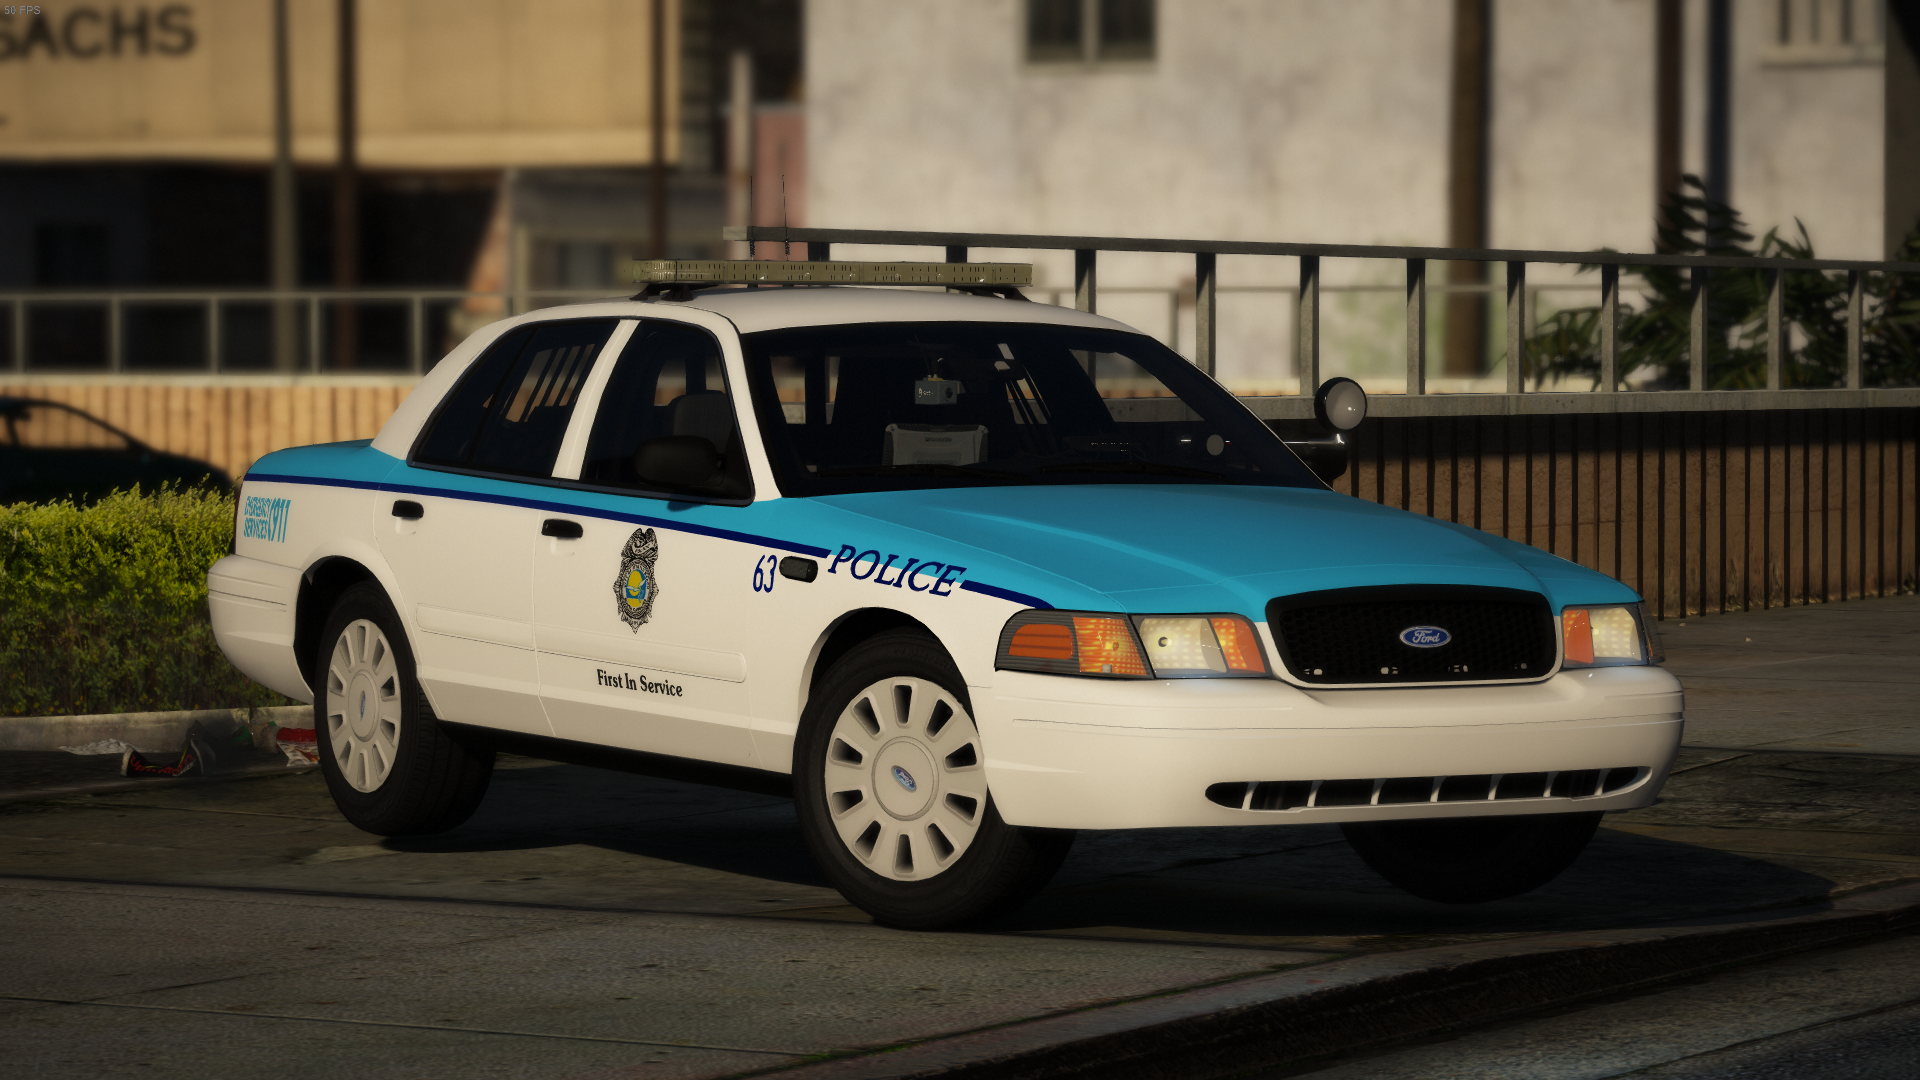 Grand_Theft_Auto_V_10_8_2019_2_30_59_AM.png.4ff5e7ac8a8a6f9336bf2ae049badf50.png